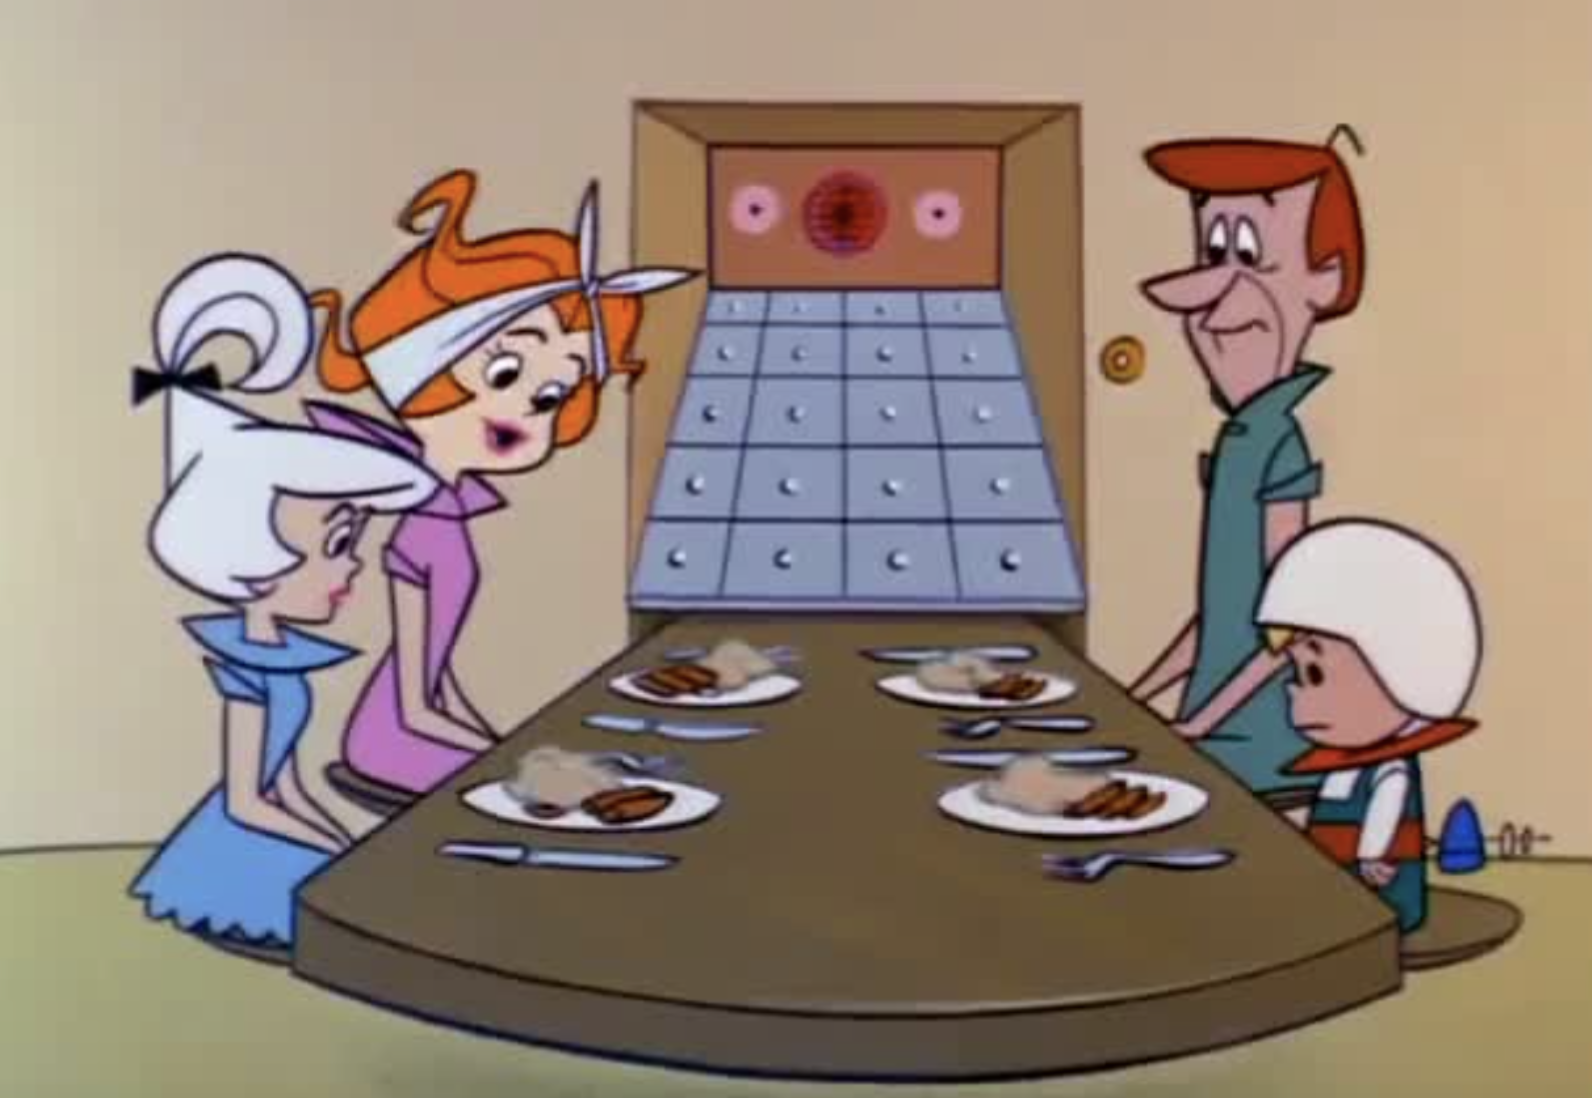 It’s basically the Jetsons out here, y’all. Credit: https://getyarn.io/yarn-clip/ce7ac2f7-dfe2-49d5-8079-74df7b502b55#TODOFRns.copy 